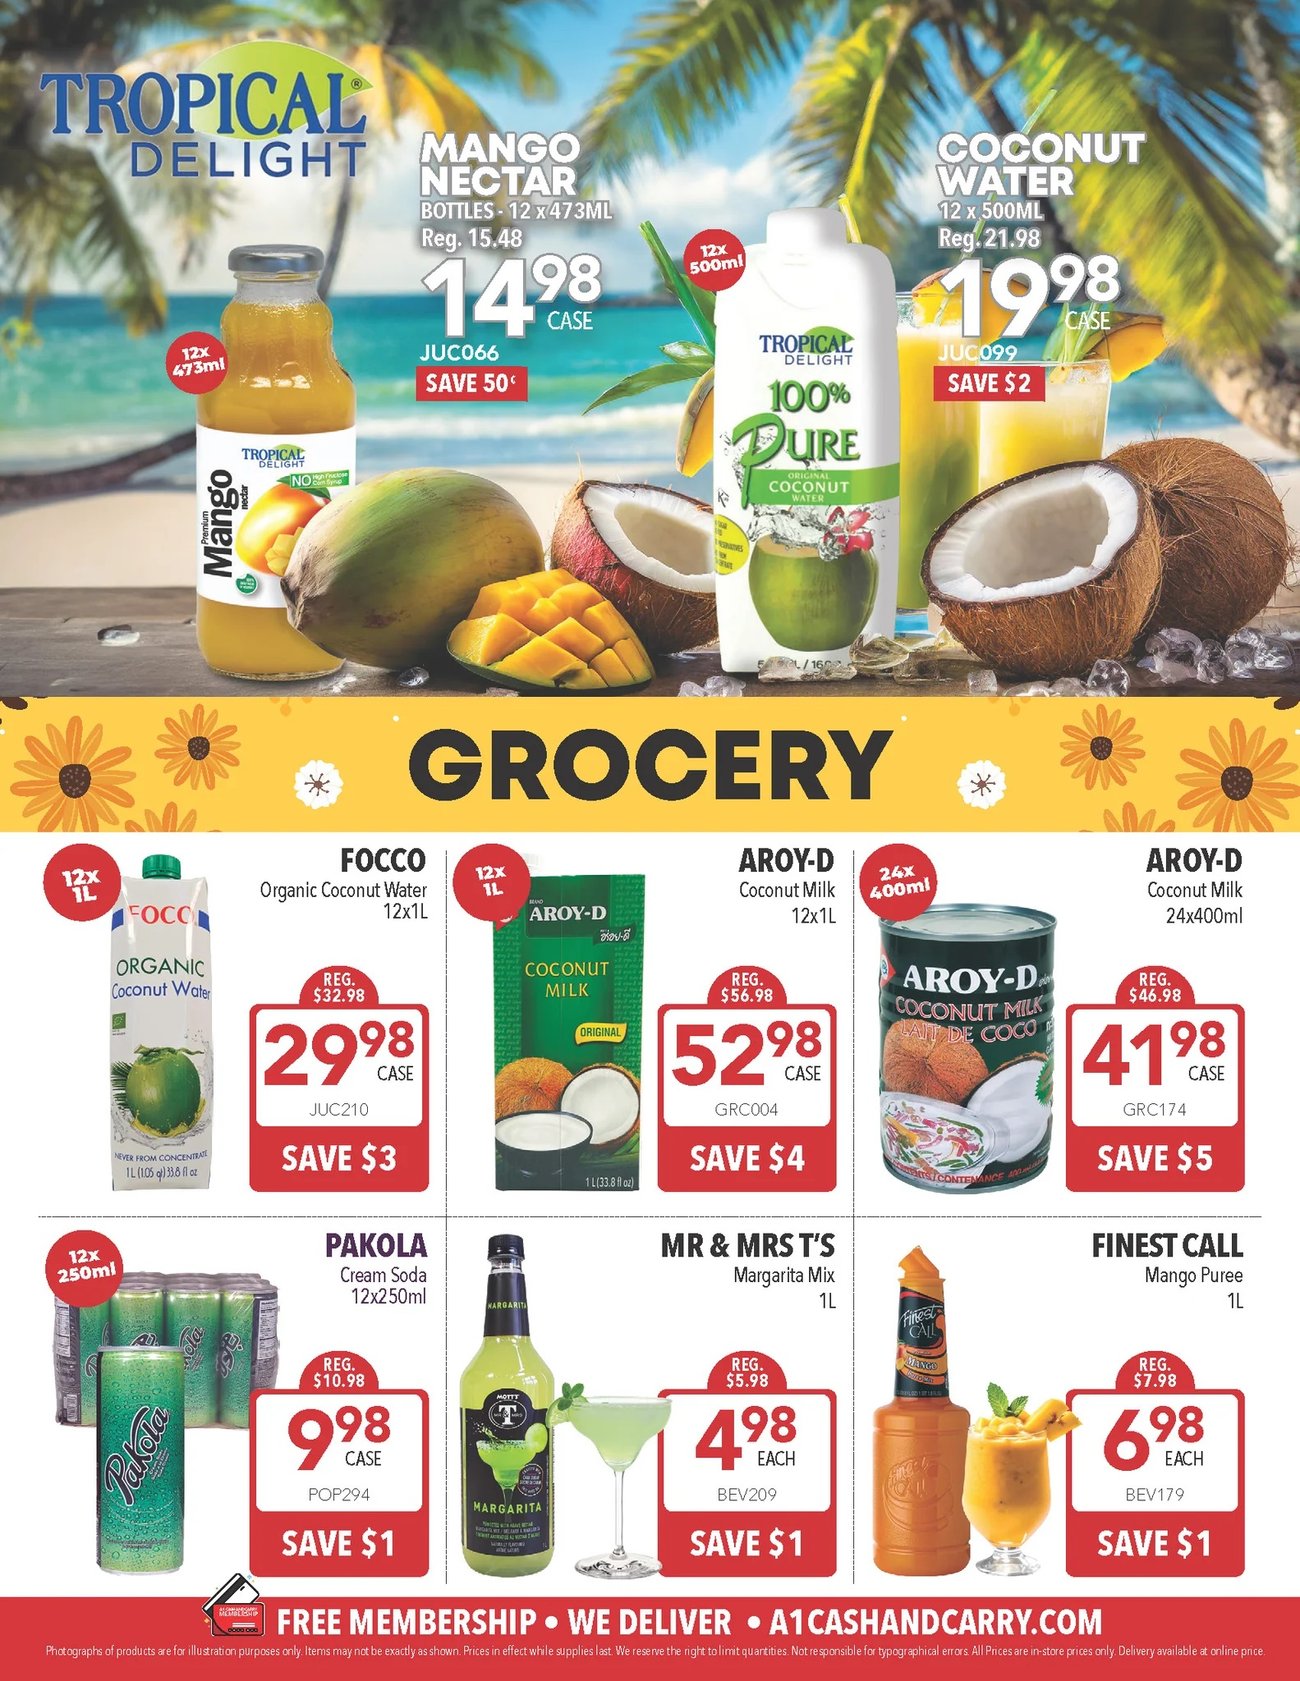 A1 Cash & Carry - Flyer Specials - Page 4